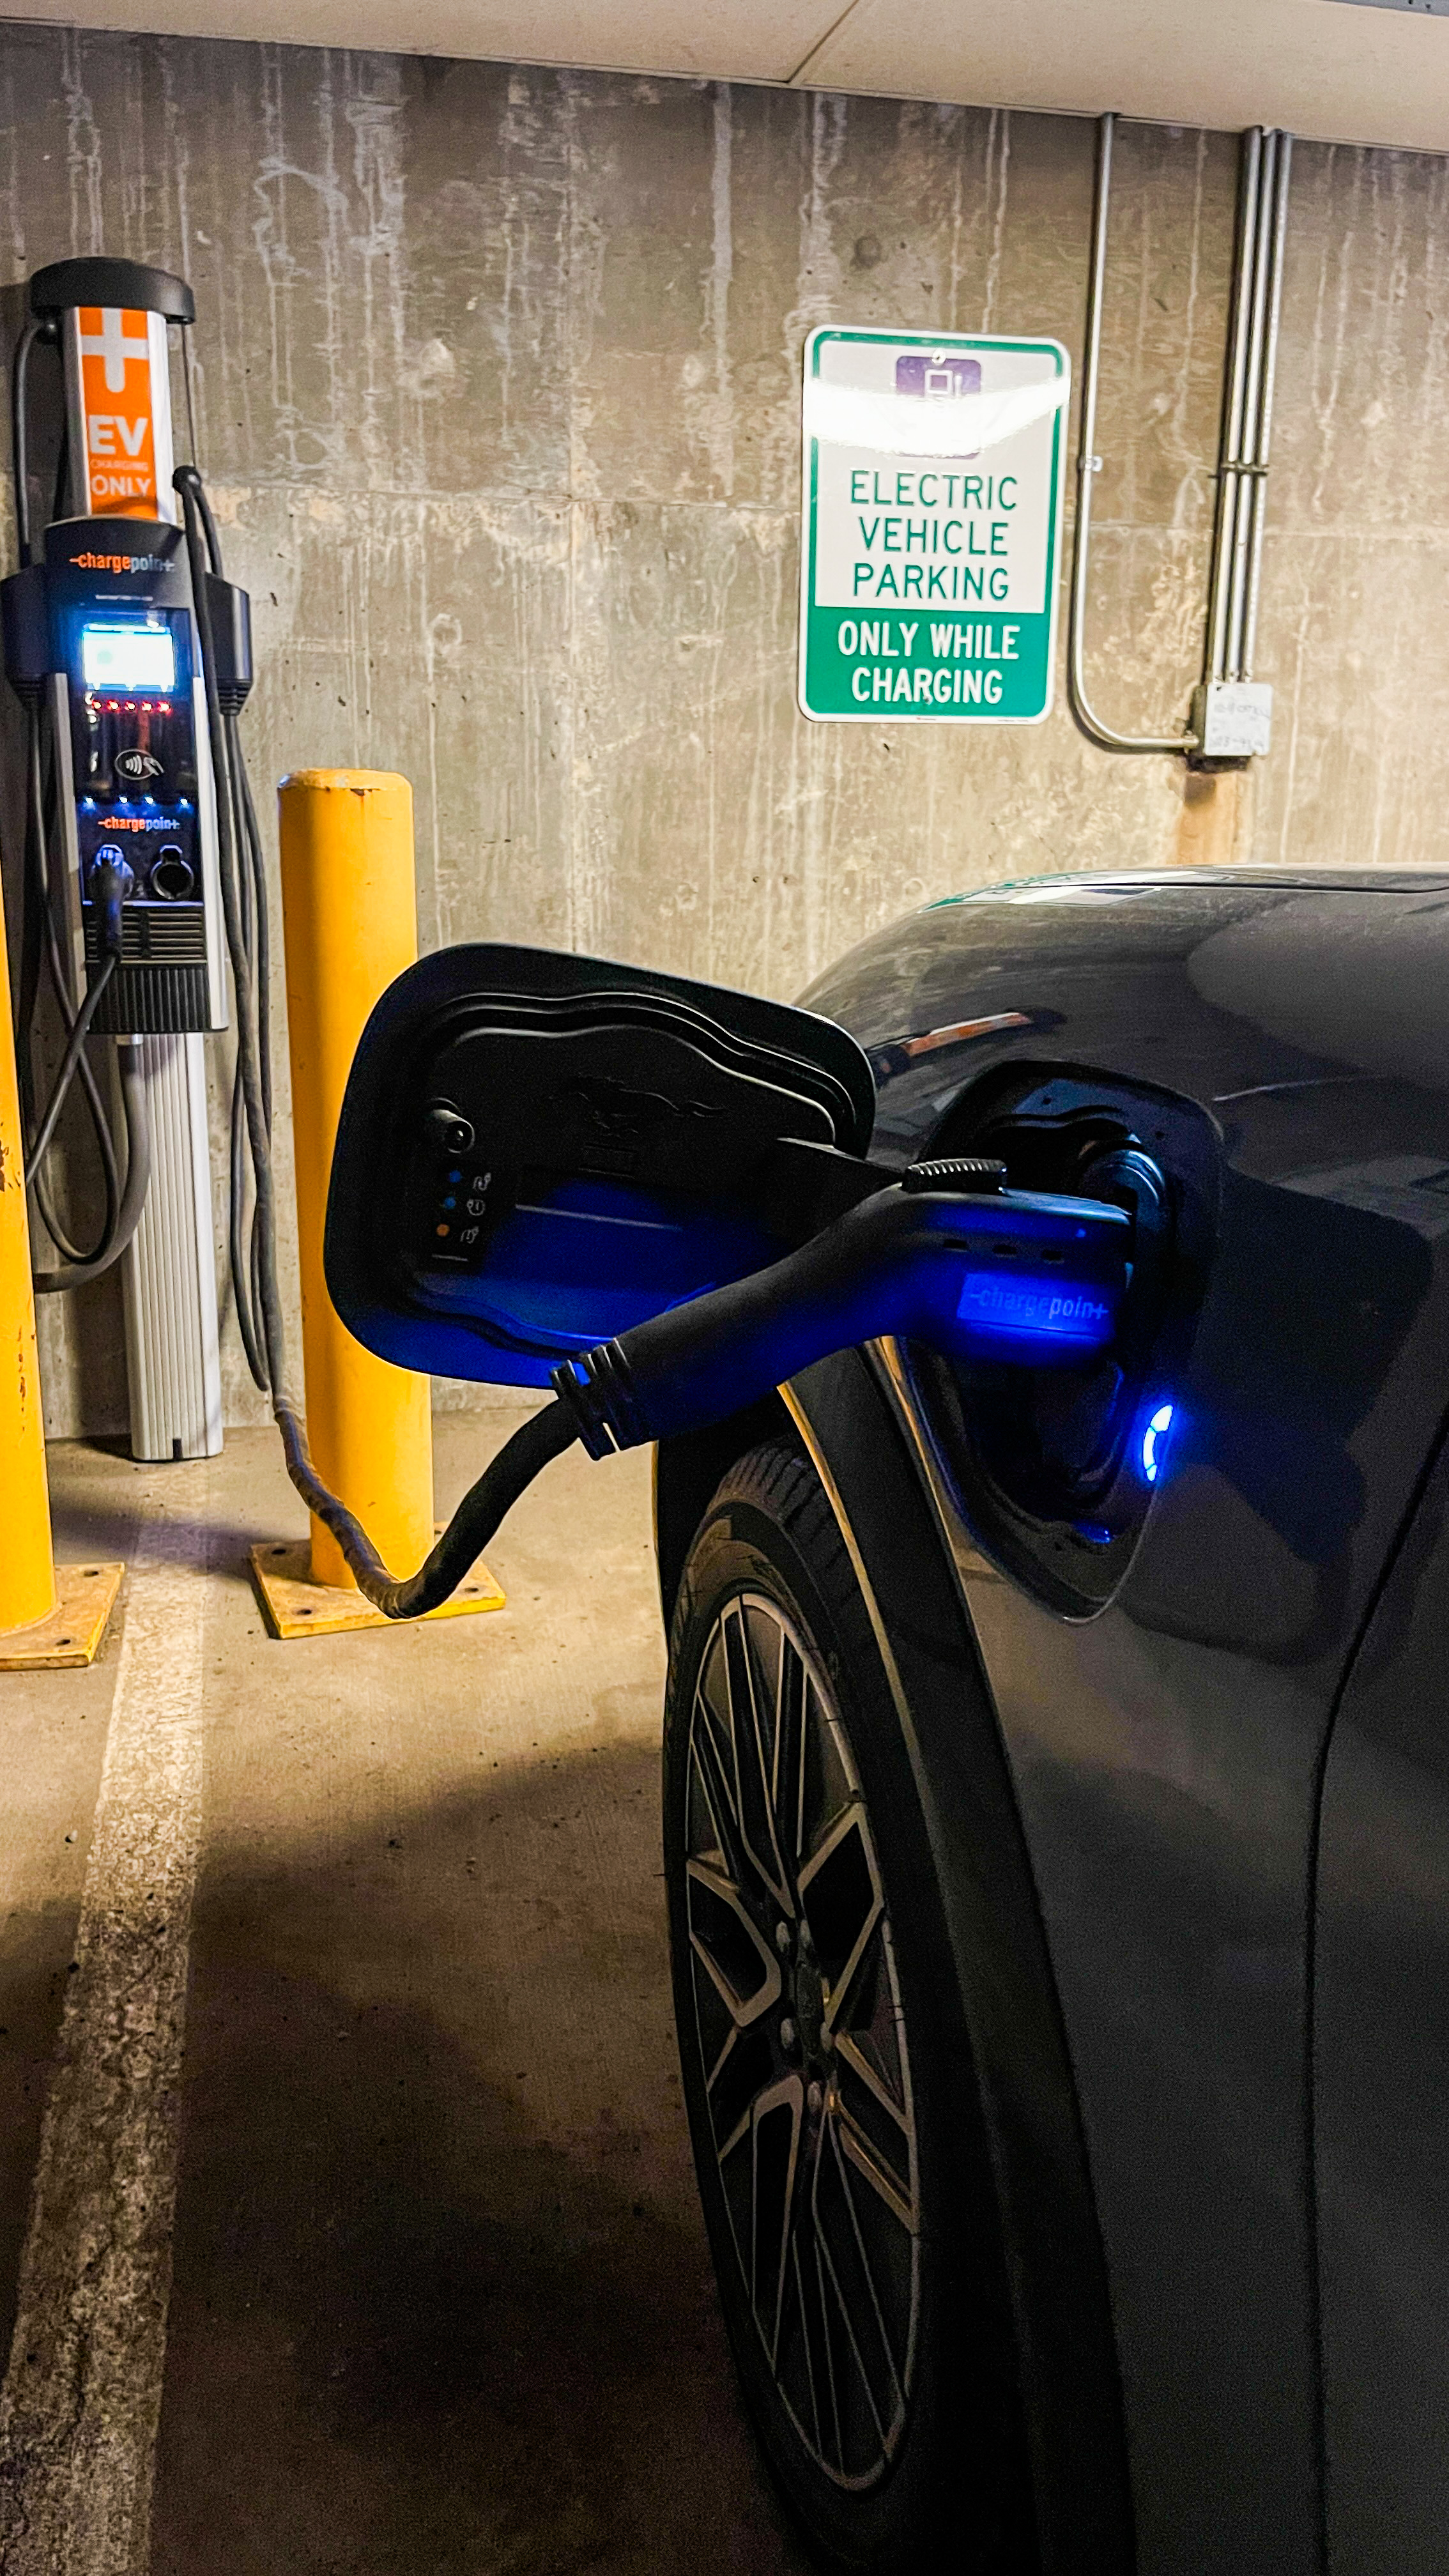 The Ford Mustang Mach-E is plugged in and charging in a covered parking garage. The charging port glows blue, creating a reflection on the car.